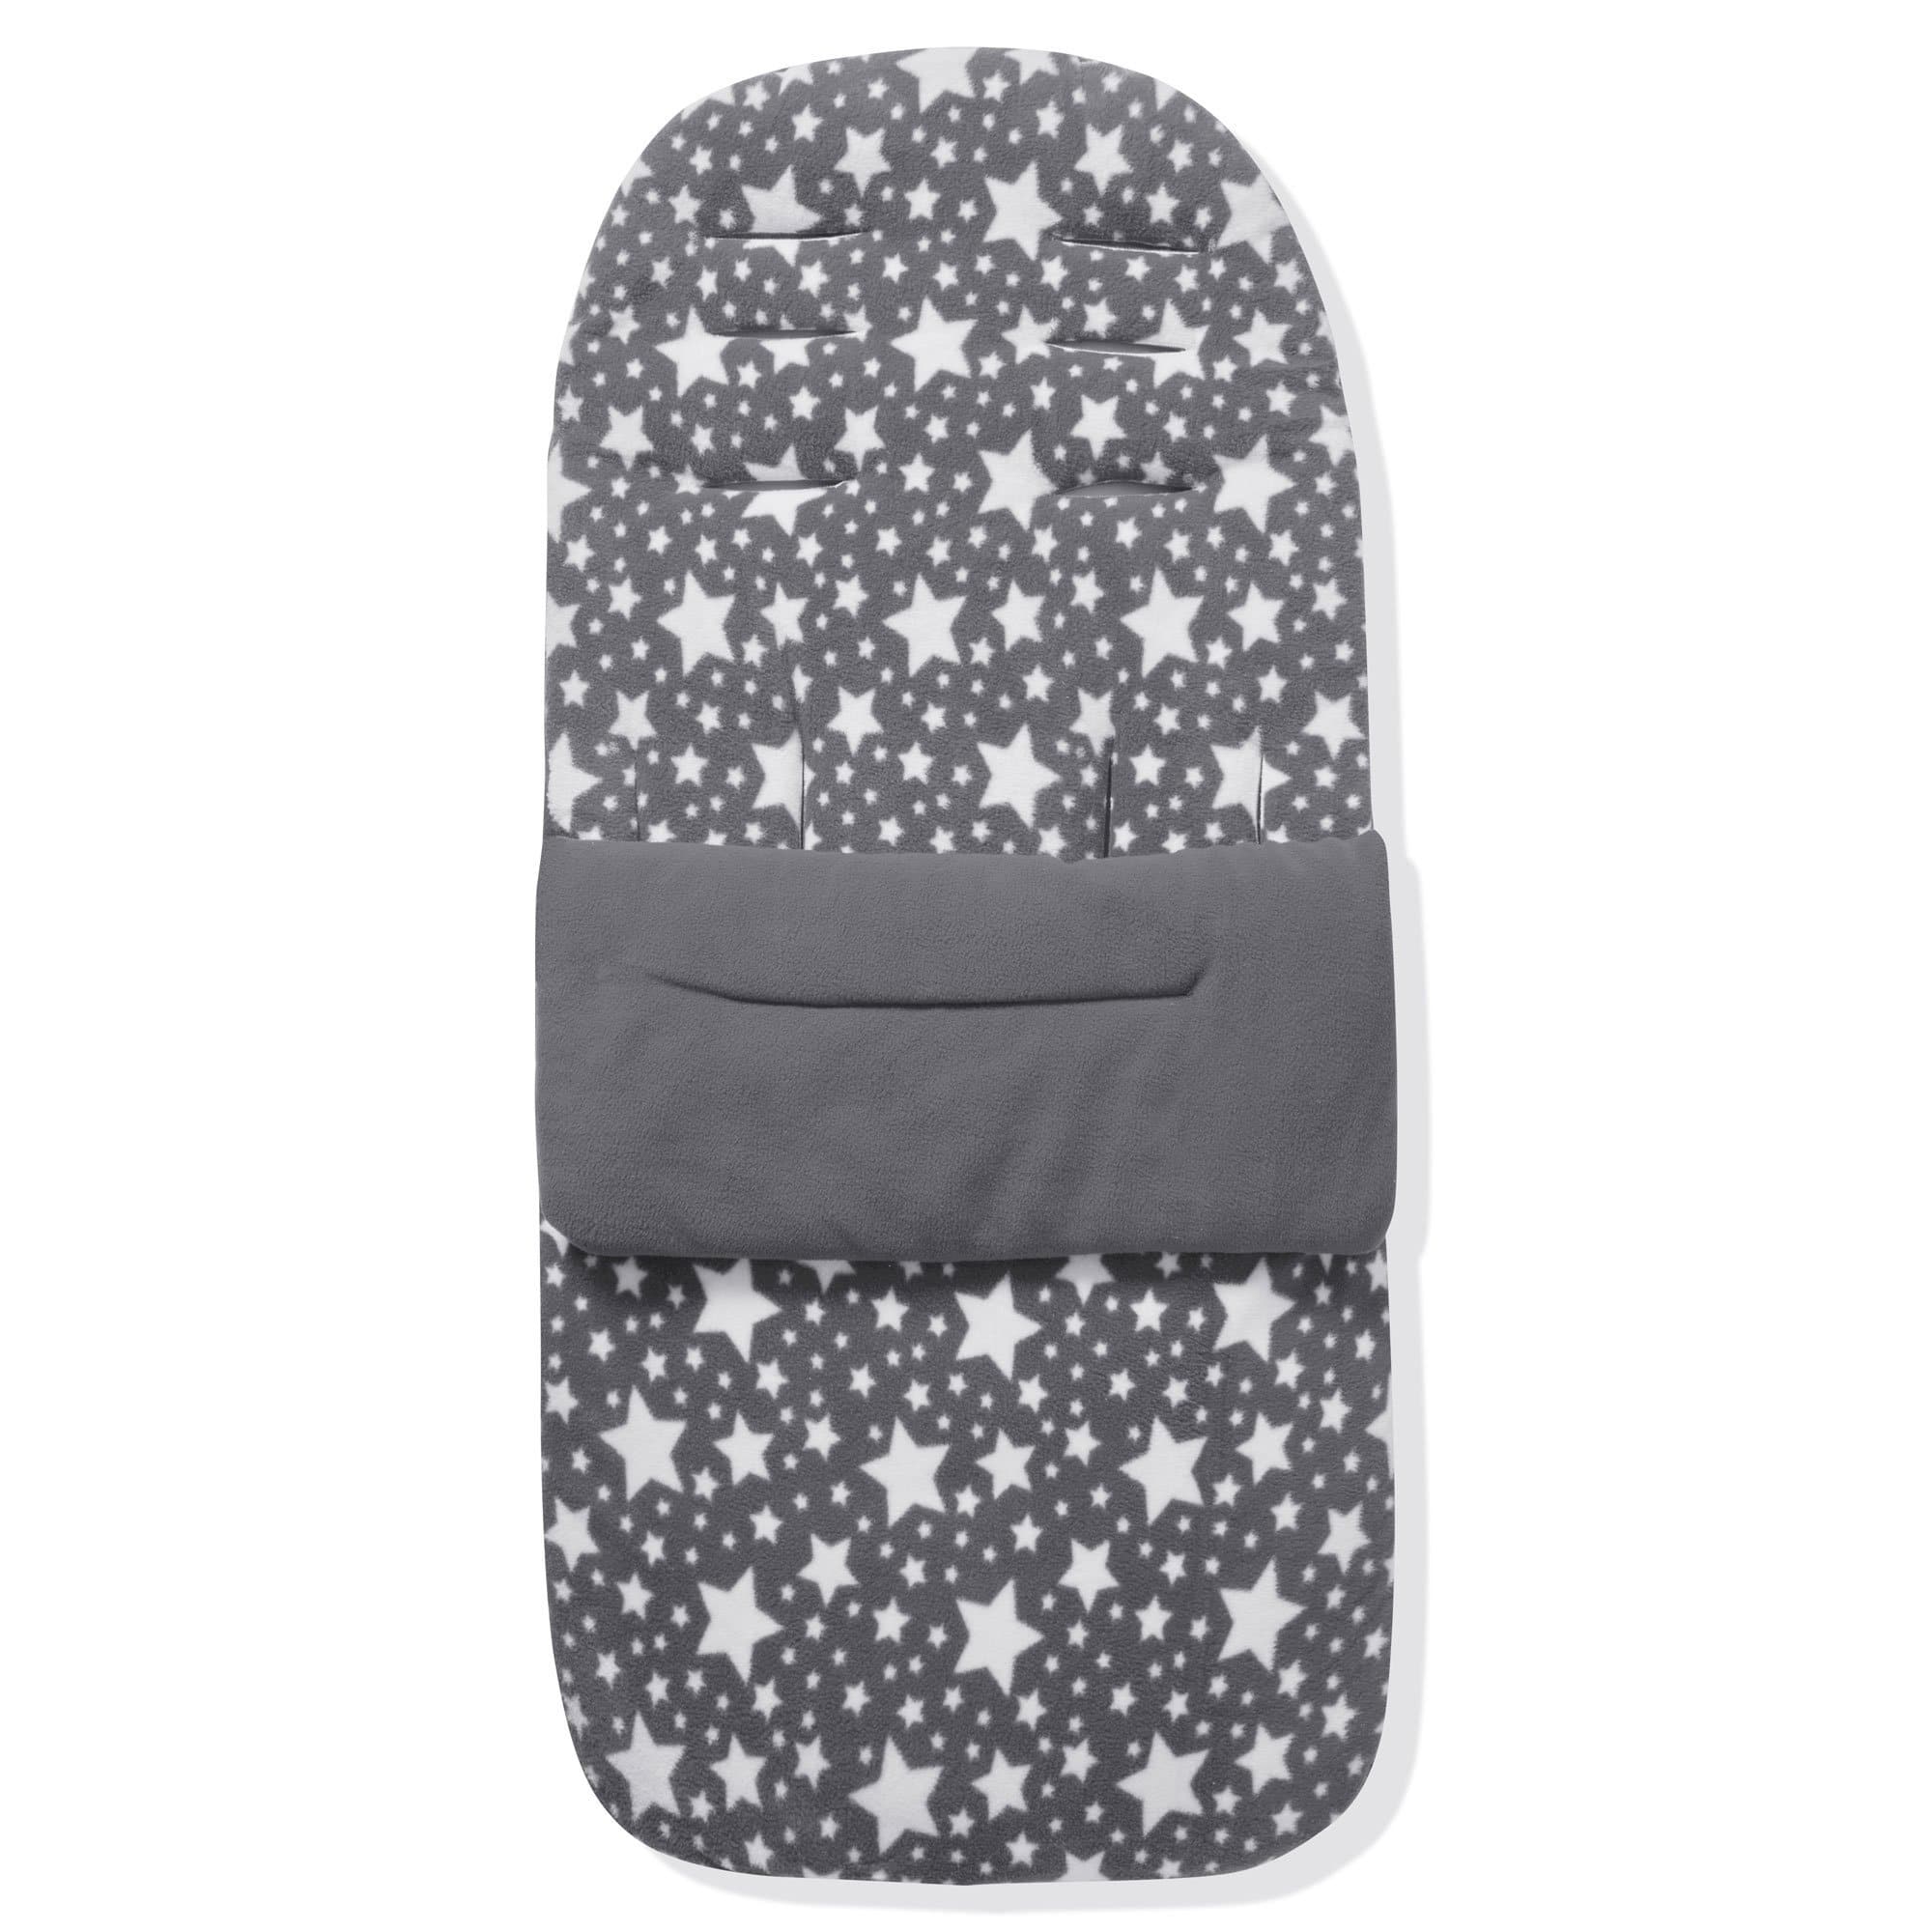 Fleece Footmuff / Cosy Toes Compatible With Cam - For Your Little One